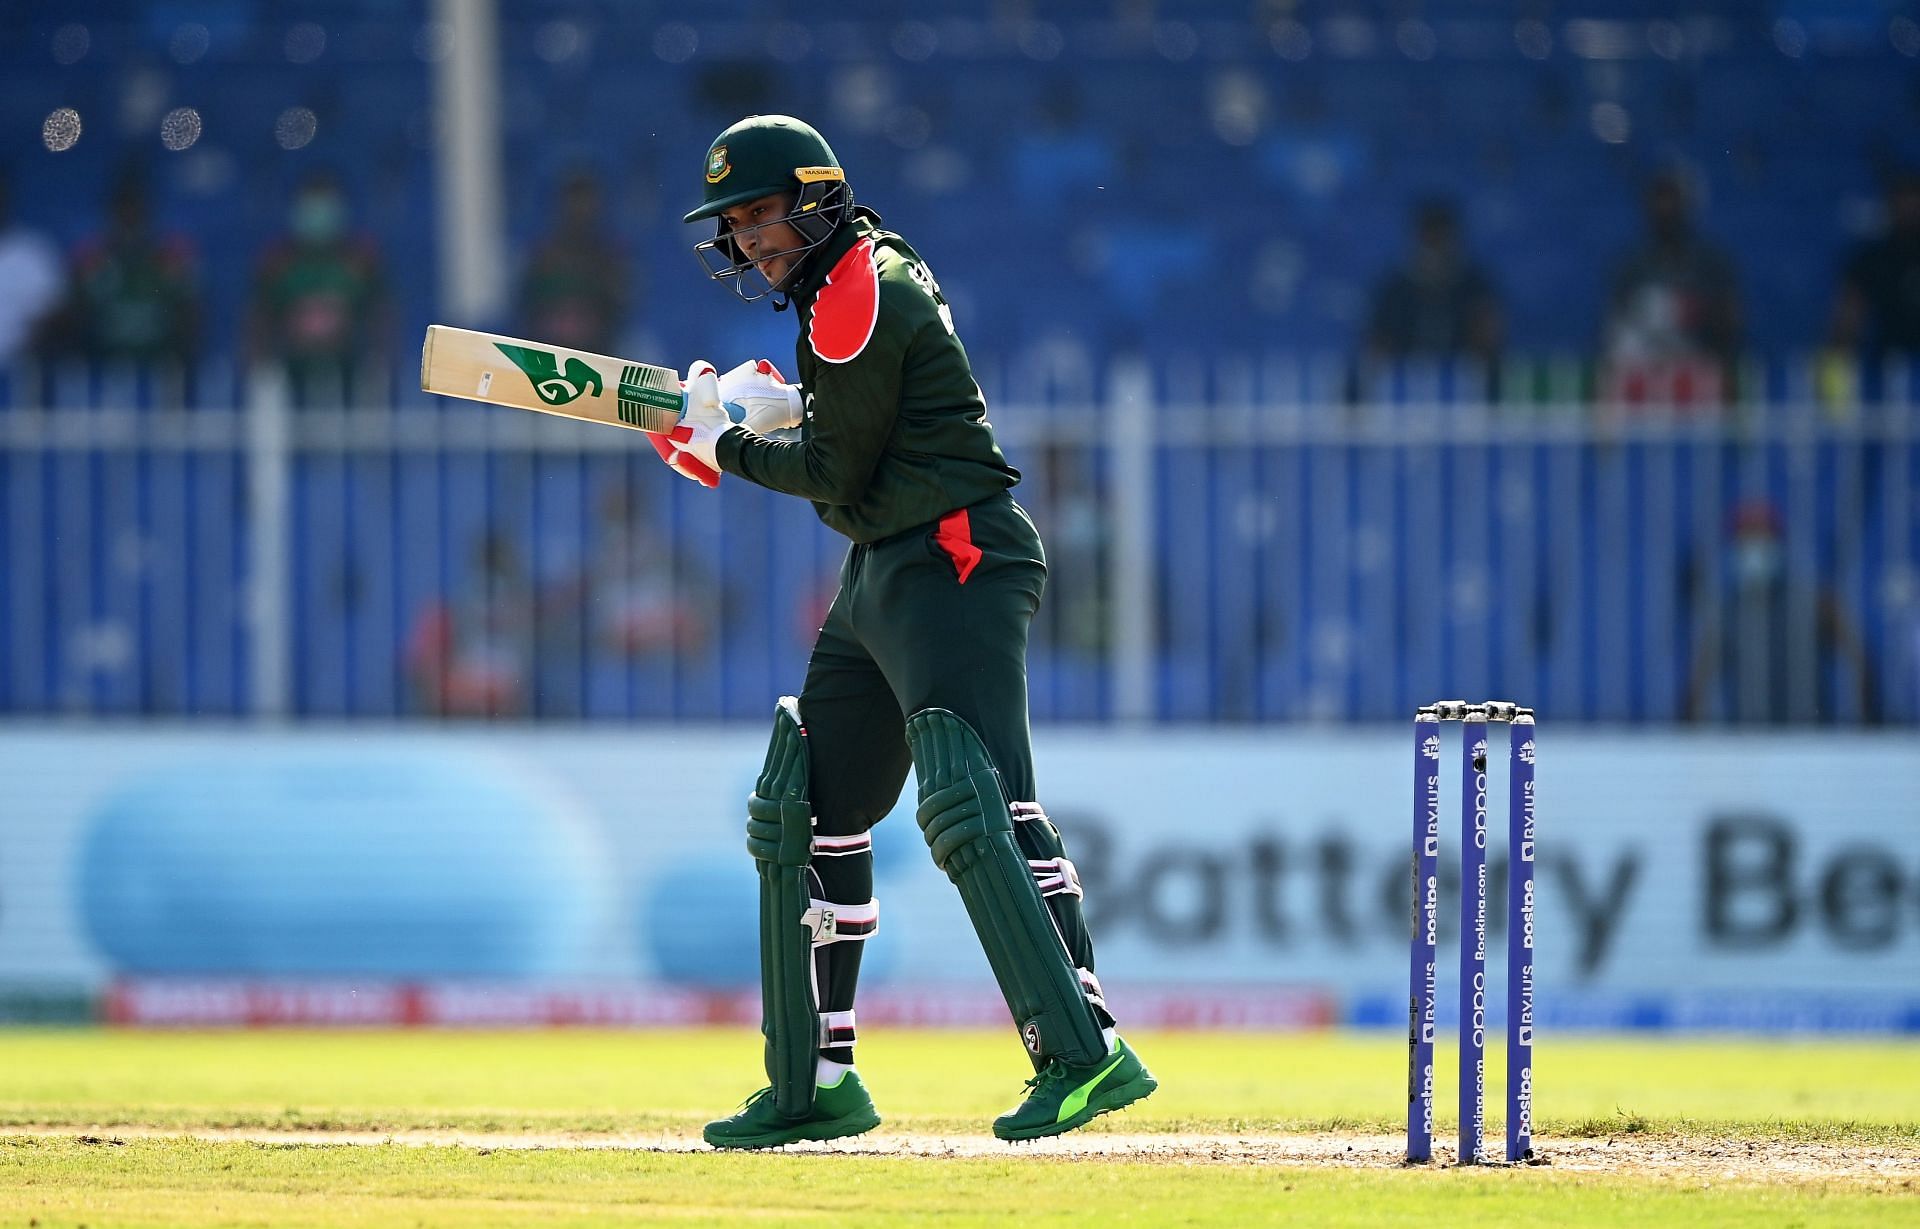 Shakib Al Hasan was chosen as the player of the match in the first ODI.